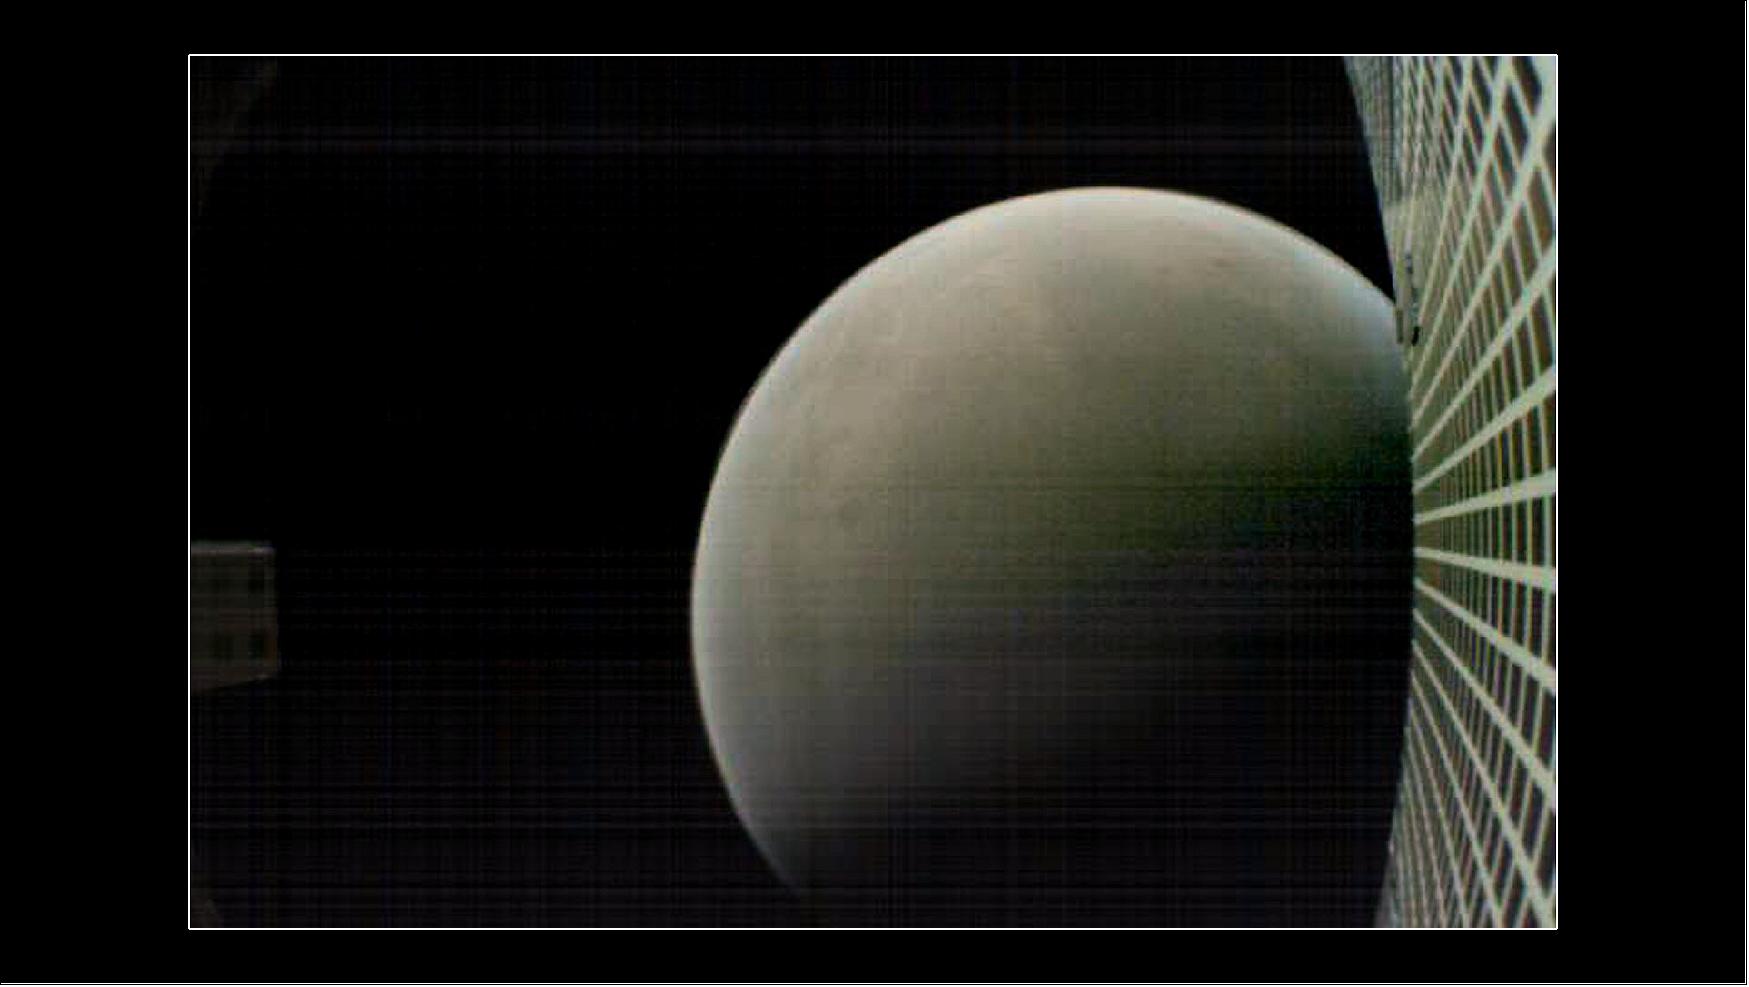 Figure 55: The MarCO-B CubeSat took this image of Mars from about 4,700 miles (6,000 km) away during its flyby of the Red Planet on Nov. 26, 2018. MarCO-B was flying by Mars with its twin, MarCO-A, to attempt to serve as communications relays for NASA’s InSight spacecraft as it landed on Mars (image credit: NASA/JPL-Caltech)